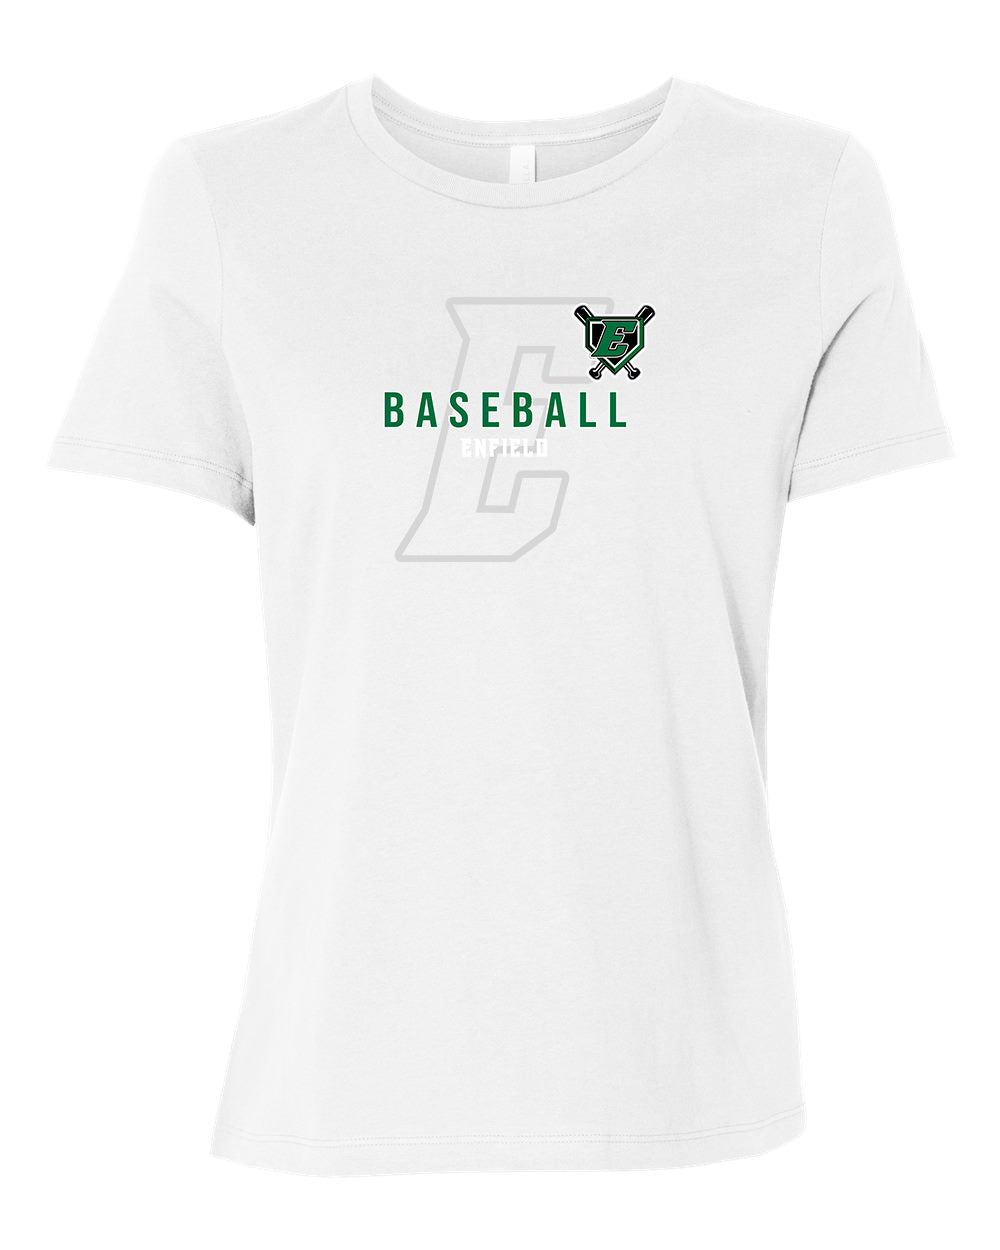 ELL Women’s Relaxed Jersey Tee "Big E Baseball" - 6400 (color options available)